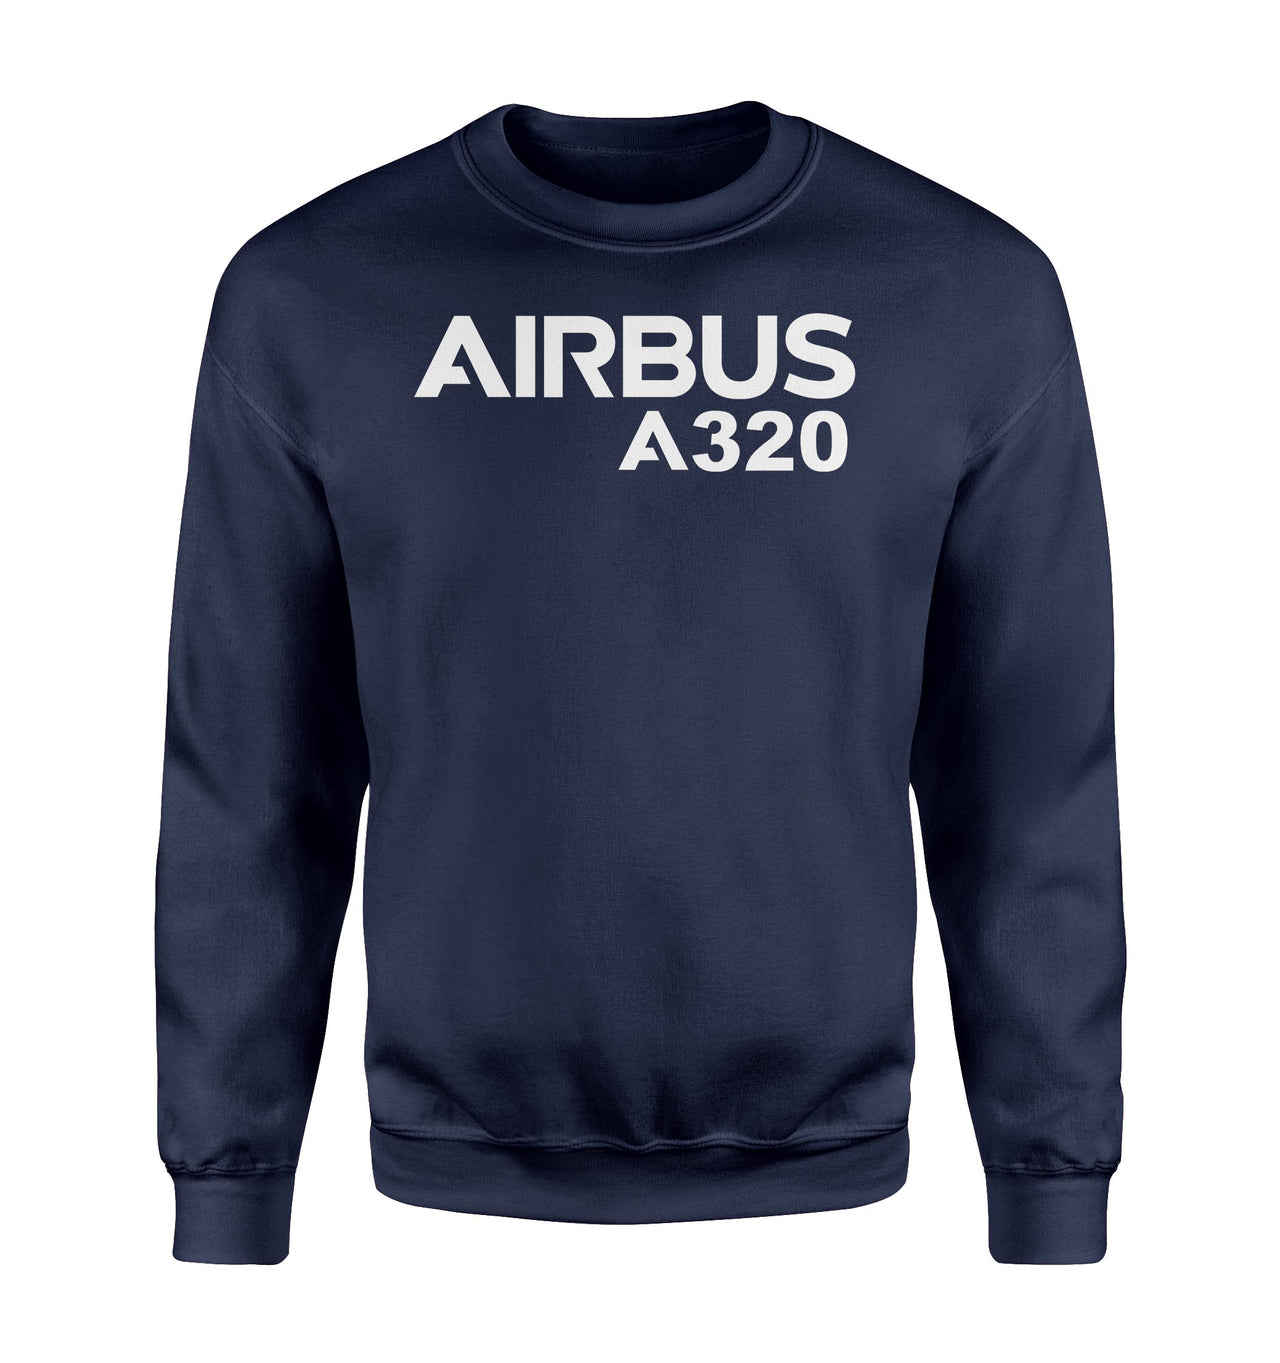 Airbus A320 & Text Designed Sweatshirts